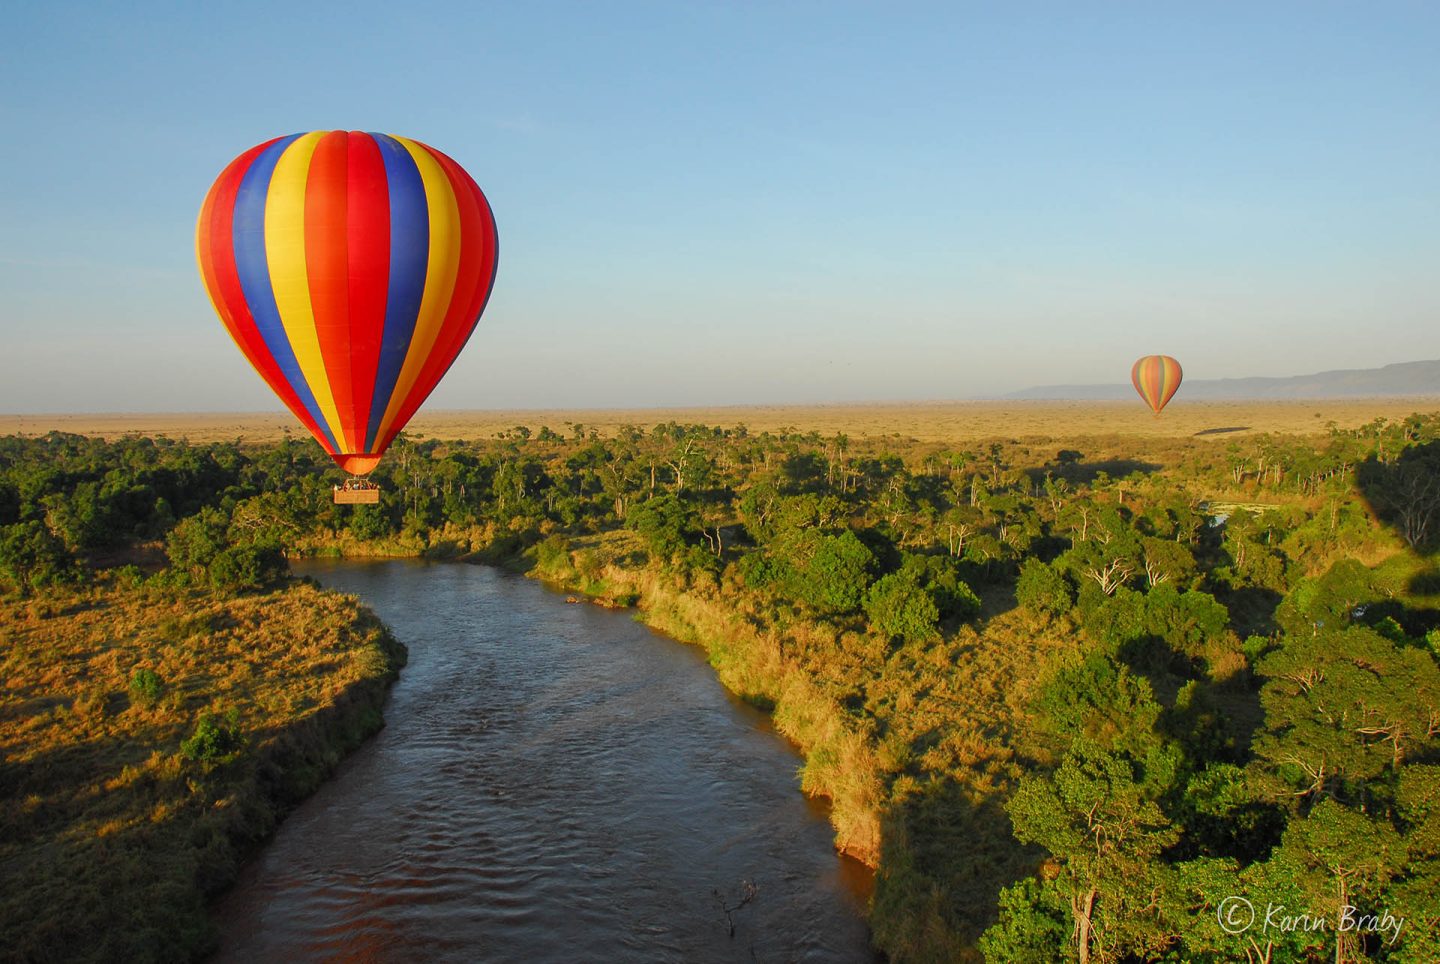 Highs: The early bird catches the worm! The early wakeup call is well worth it, floating above the Mara River and Masai Mara Reserve in a hot air balloon. Credit: Angama Mara